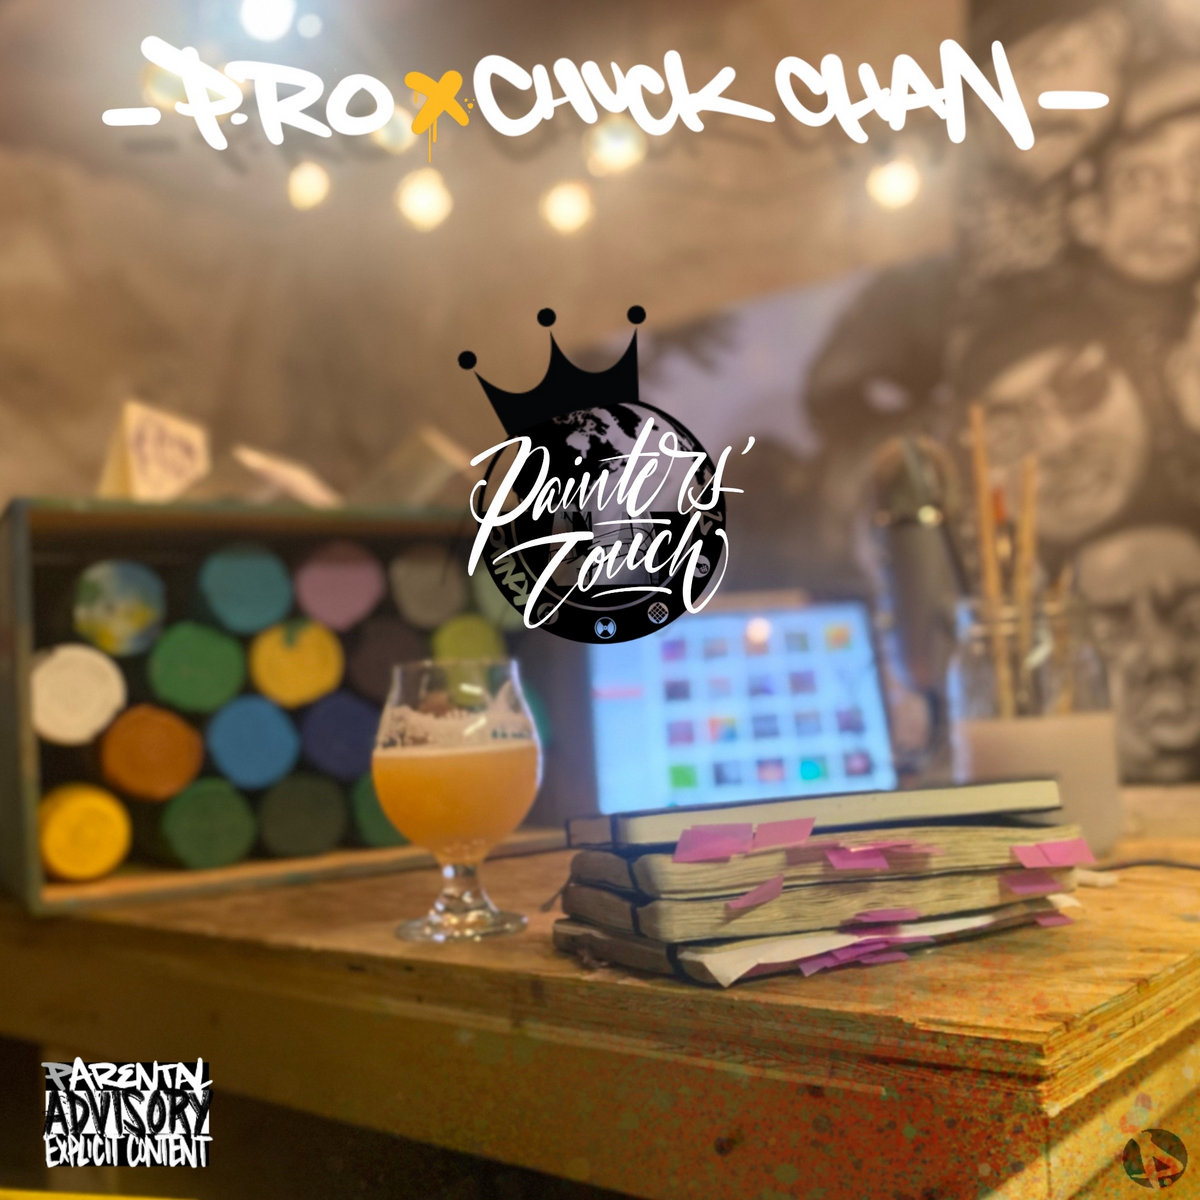 'PAINTER'S TOUCH' @P_RoUnstable x @charliesdizz After 2 single drops now here comes the full album by P-Ro entirely produced by Chuck Chan. Features: @GFamThePirate @generalbackpain @killyshoot198x @VicMonroe3 @NewVillain_1 @BONDALERO77 +++ more 👉🏾 p-ro.bandcamp.com/album/painters…